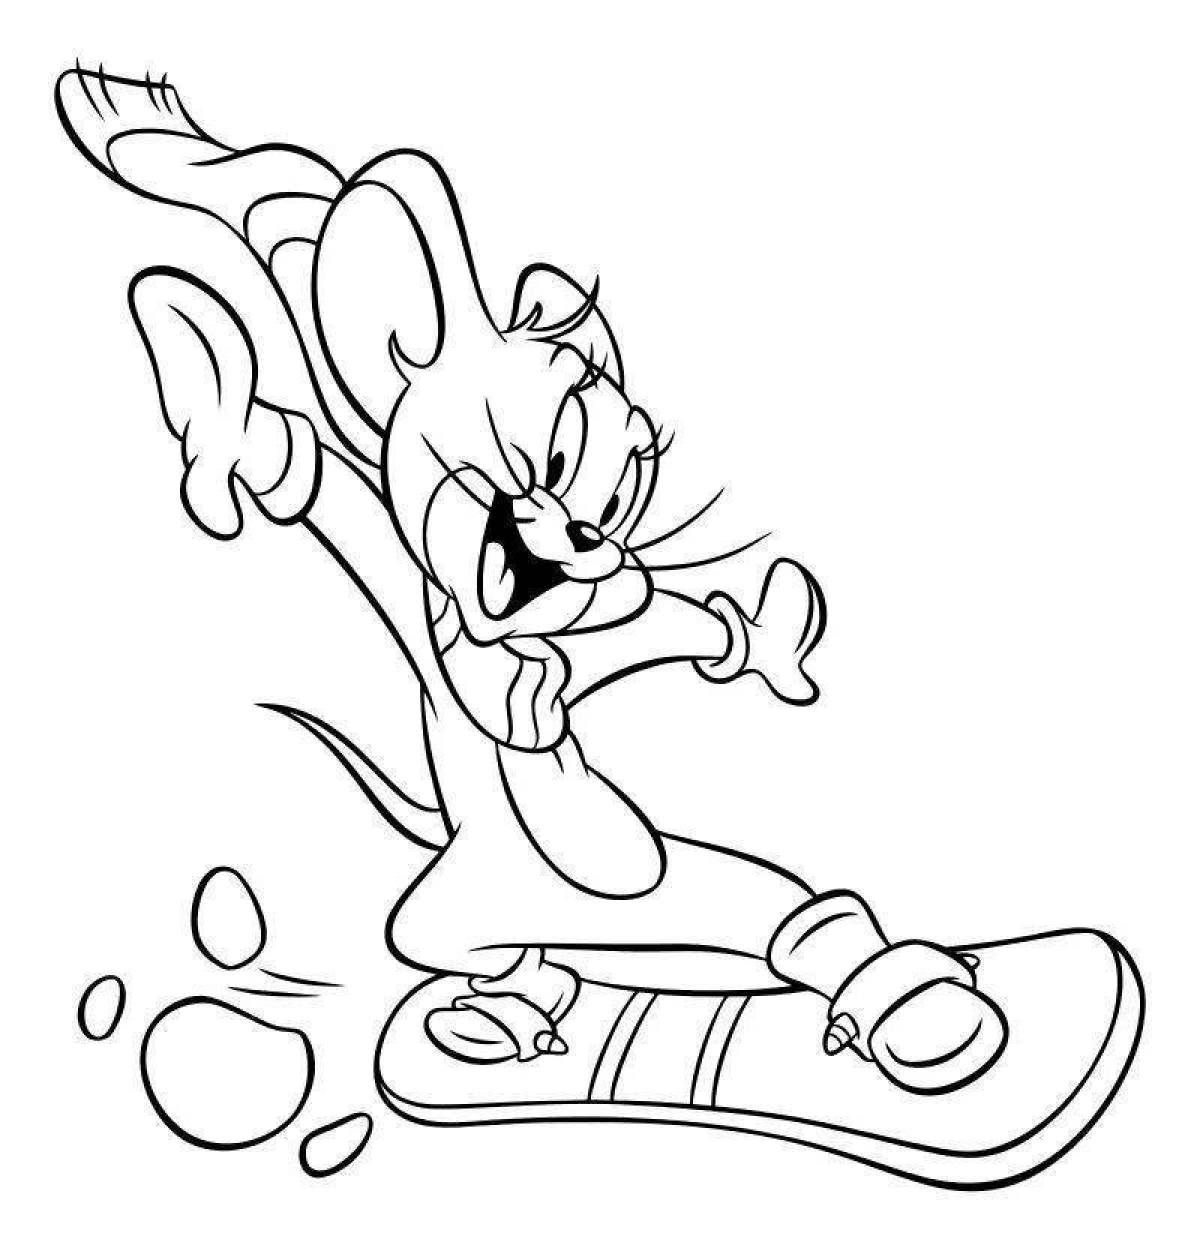 Higgly jerry coloring book